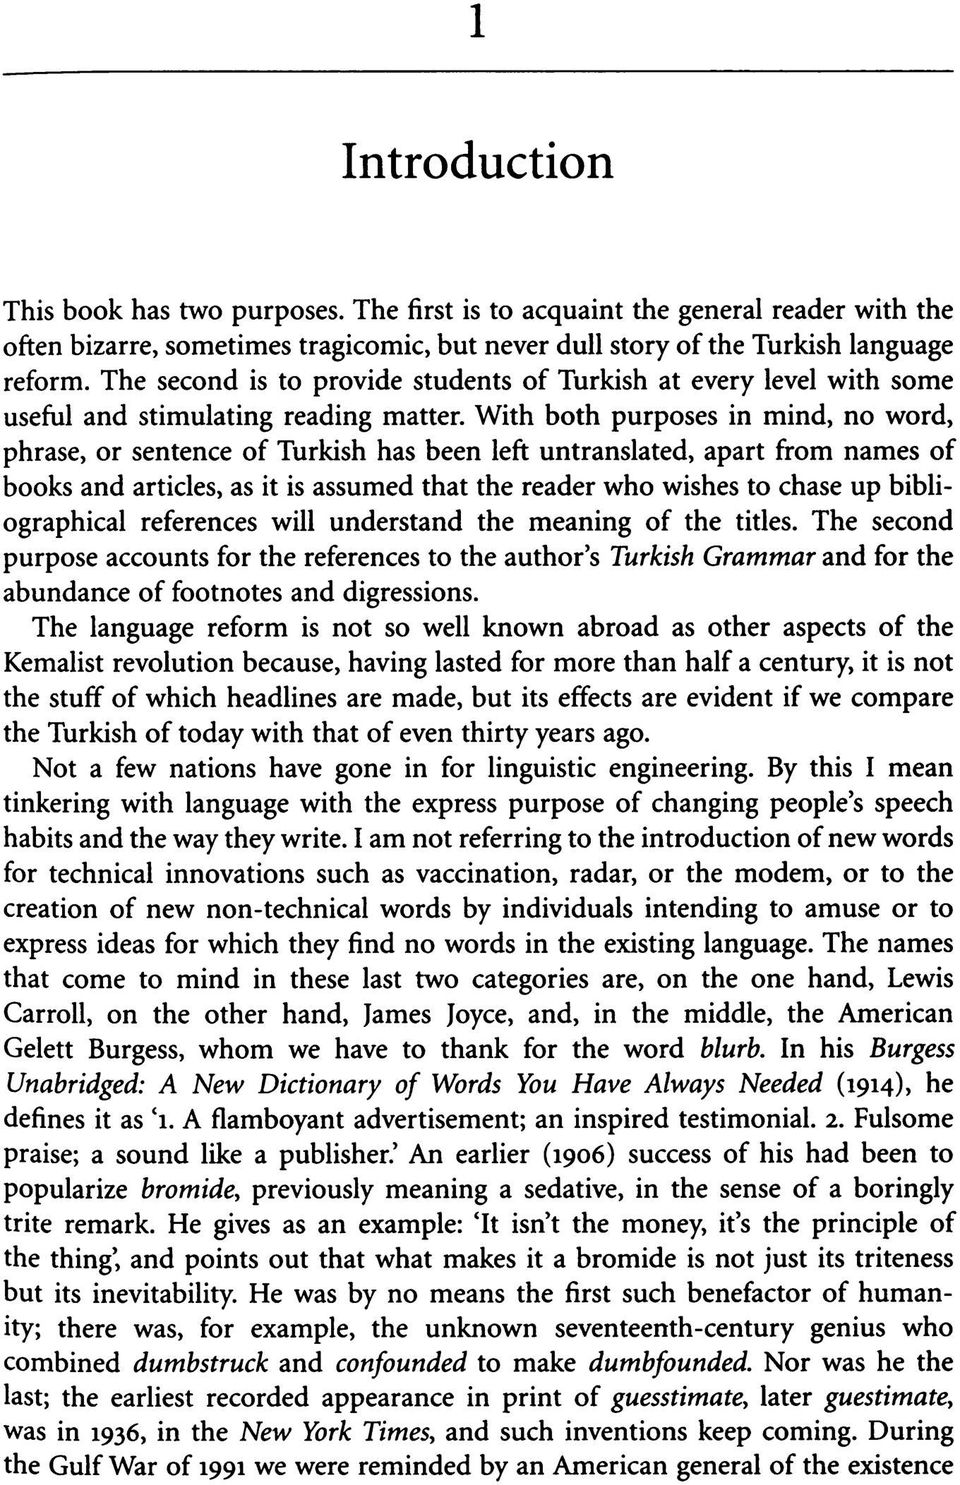 With both purposes in mind, no word, phrase, or sentence of Turkish has been left untranslated, apart from names of books and articles, as it is assumed that the reader who wishes to chase up